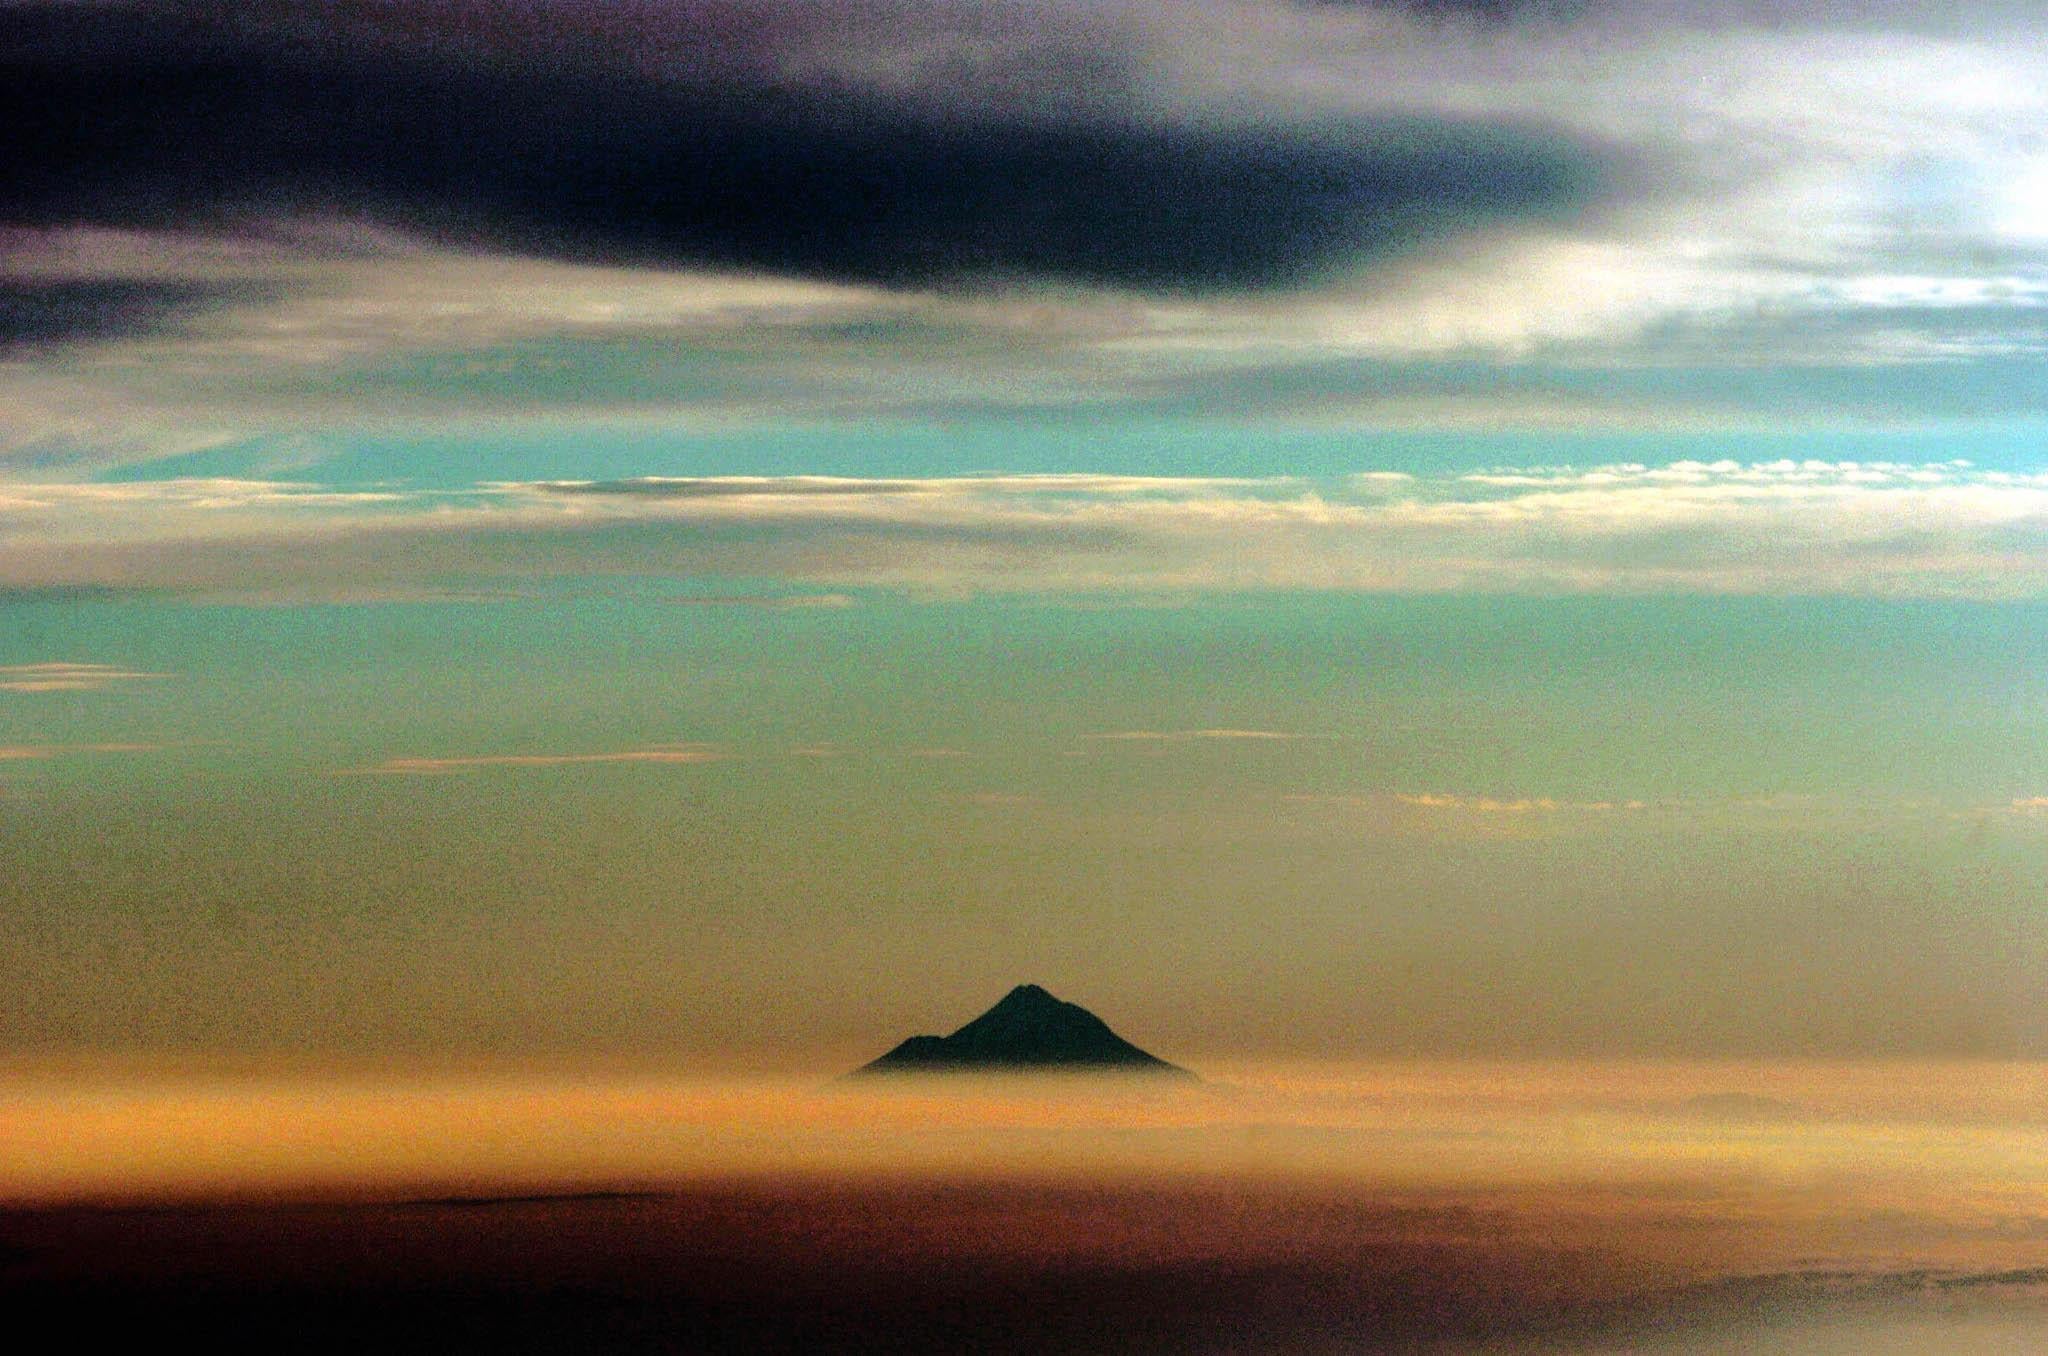 Mt Taranaki pokes its top through a layer of clouds as the sun sets in his photo taken from an airplane in New Zealand, Friday, January 28th, 2005